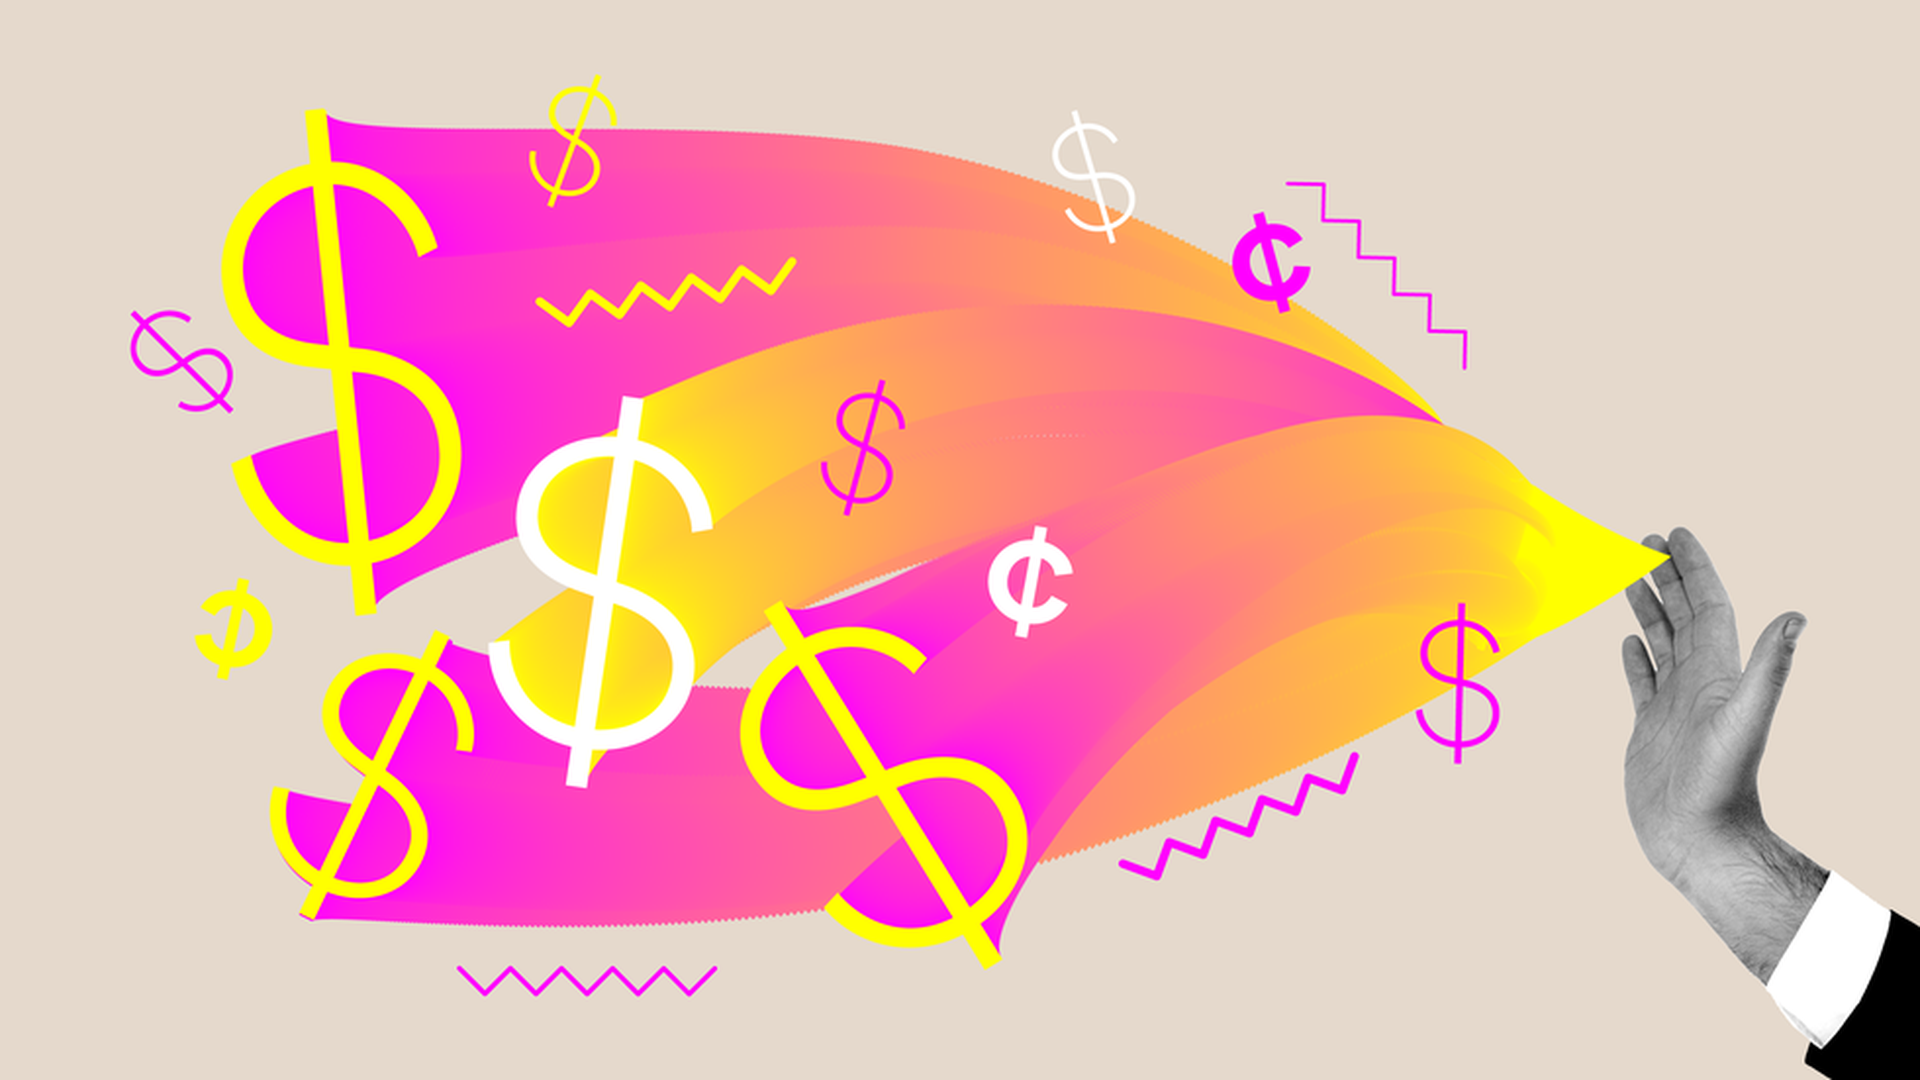 Dollar signs flowing from hand illustration